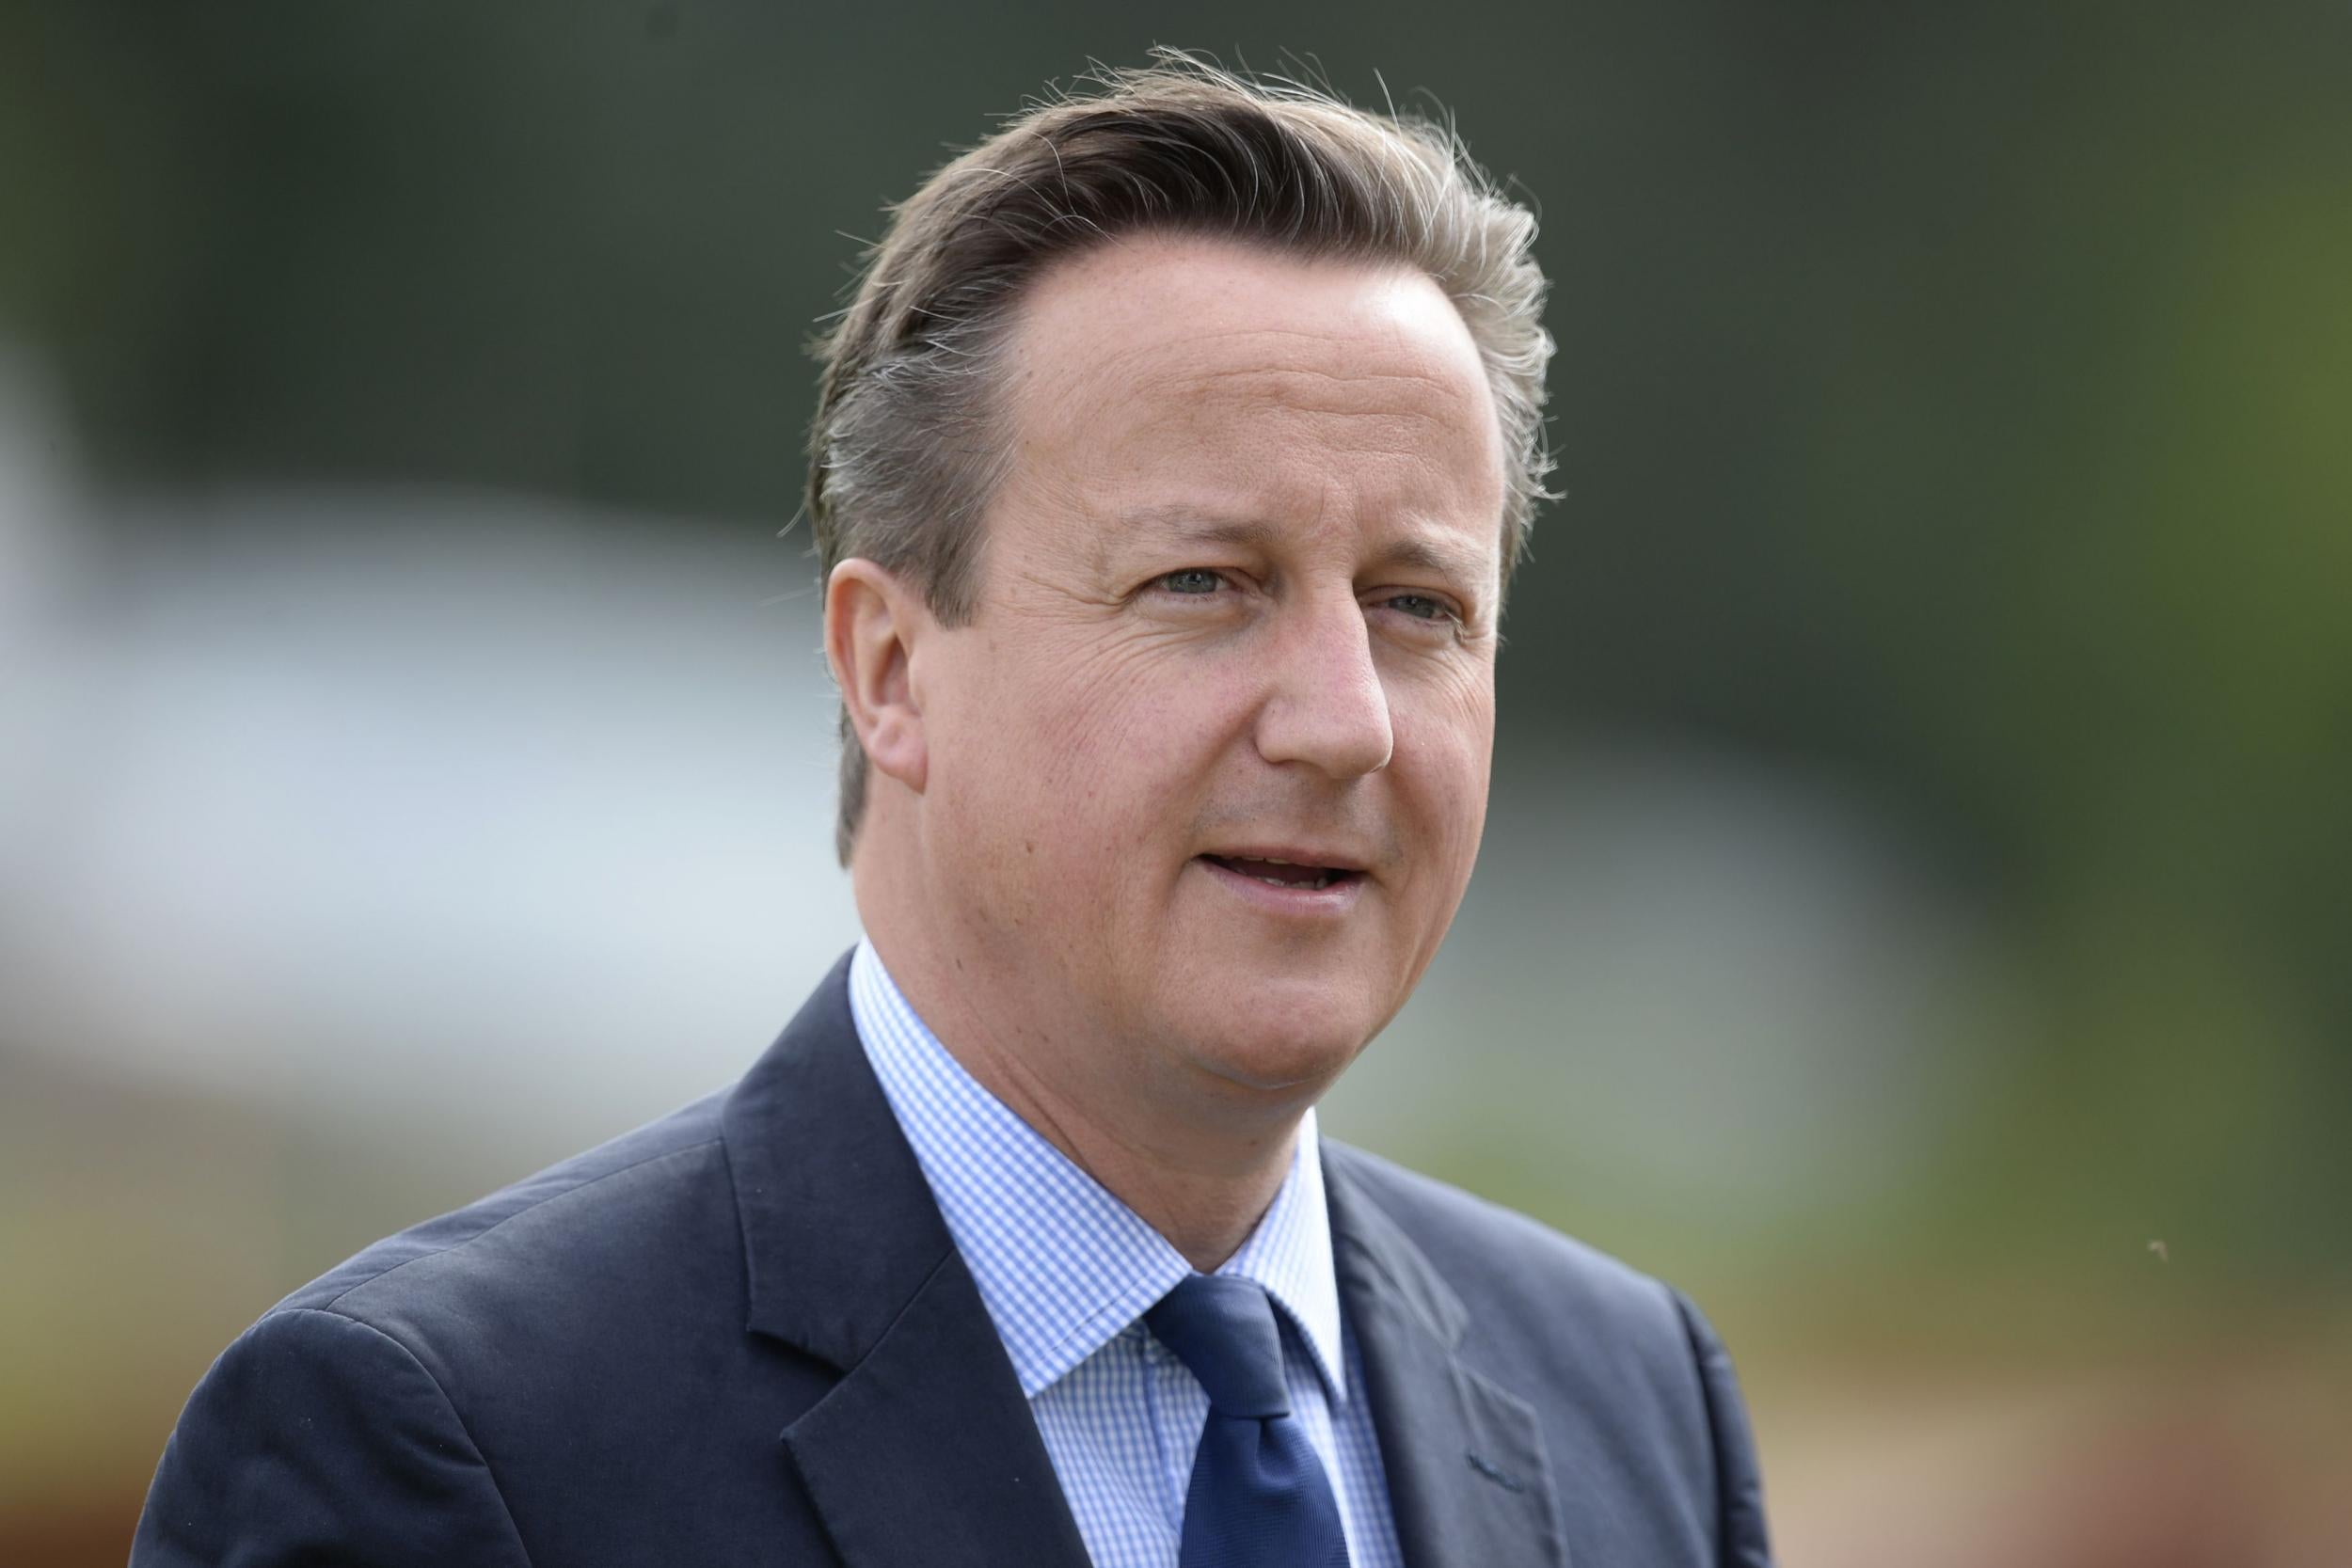 David Cameron has appointed a Commission to review the FOI Act